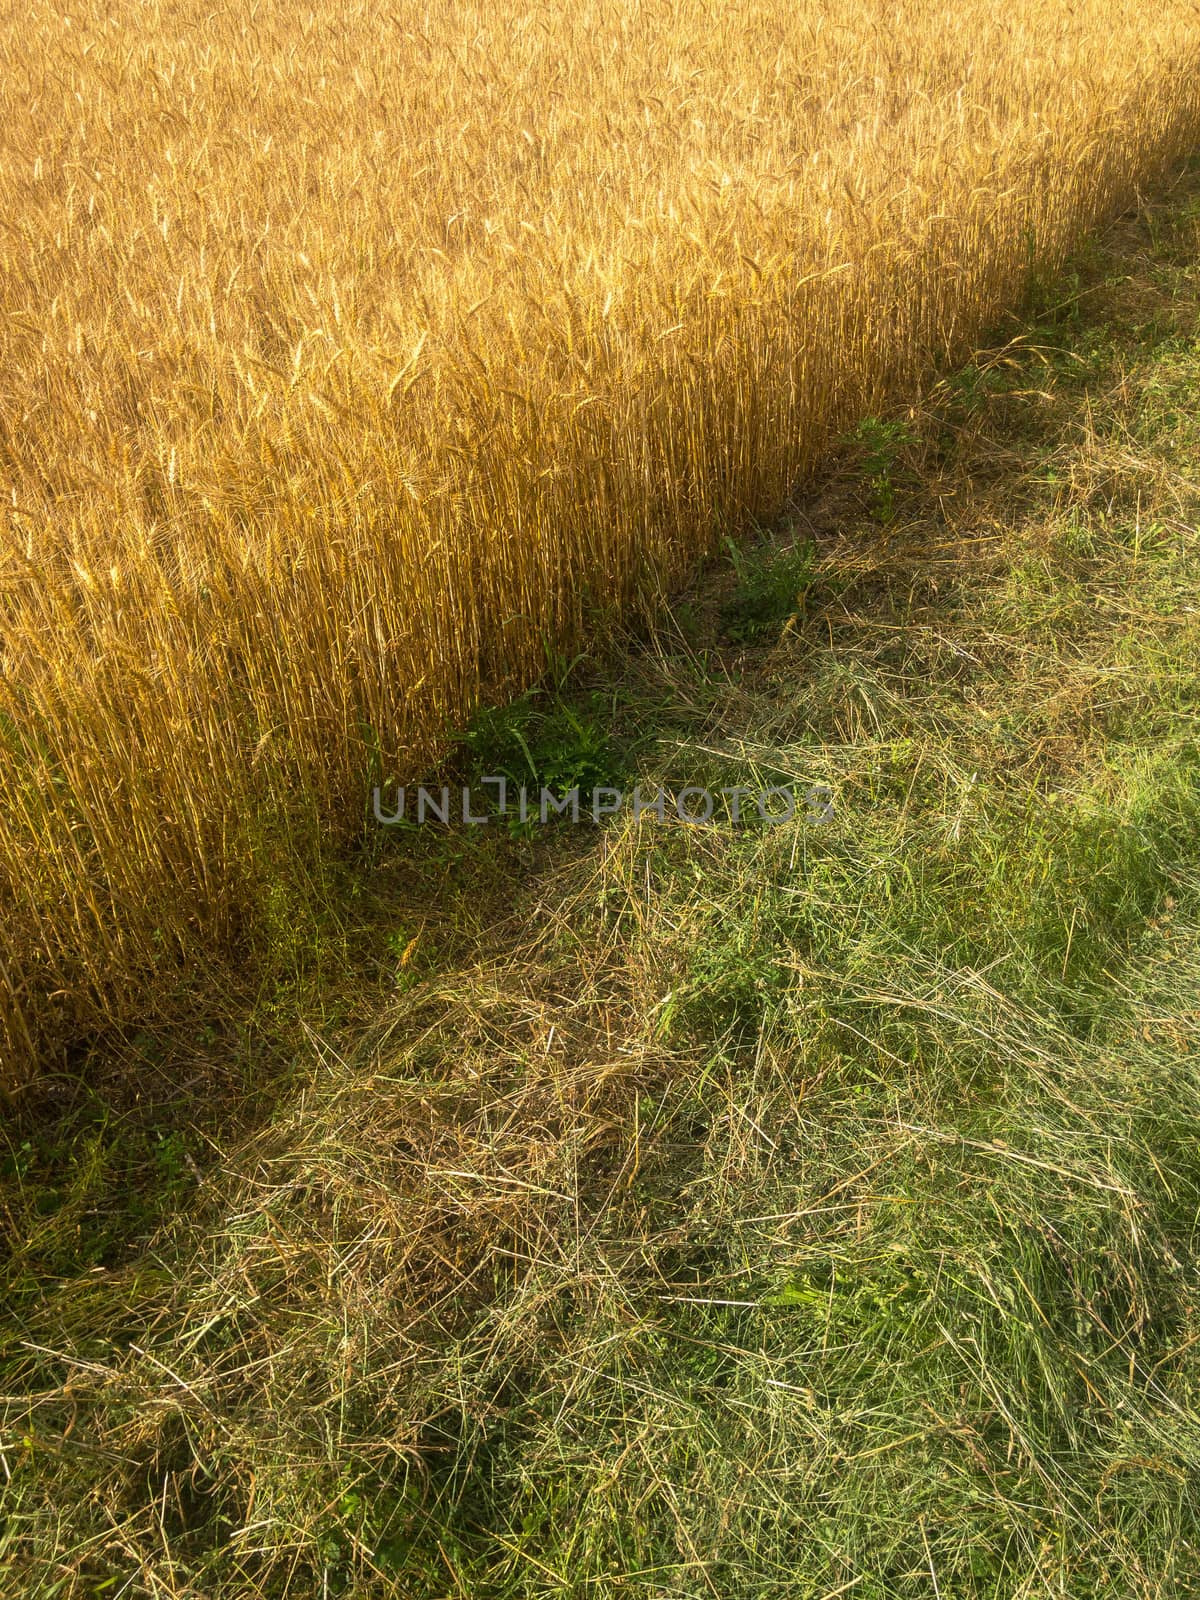 Diagonal view of wheat field and grass. by marysalen